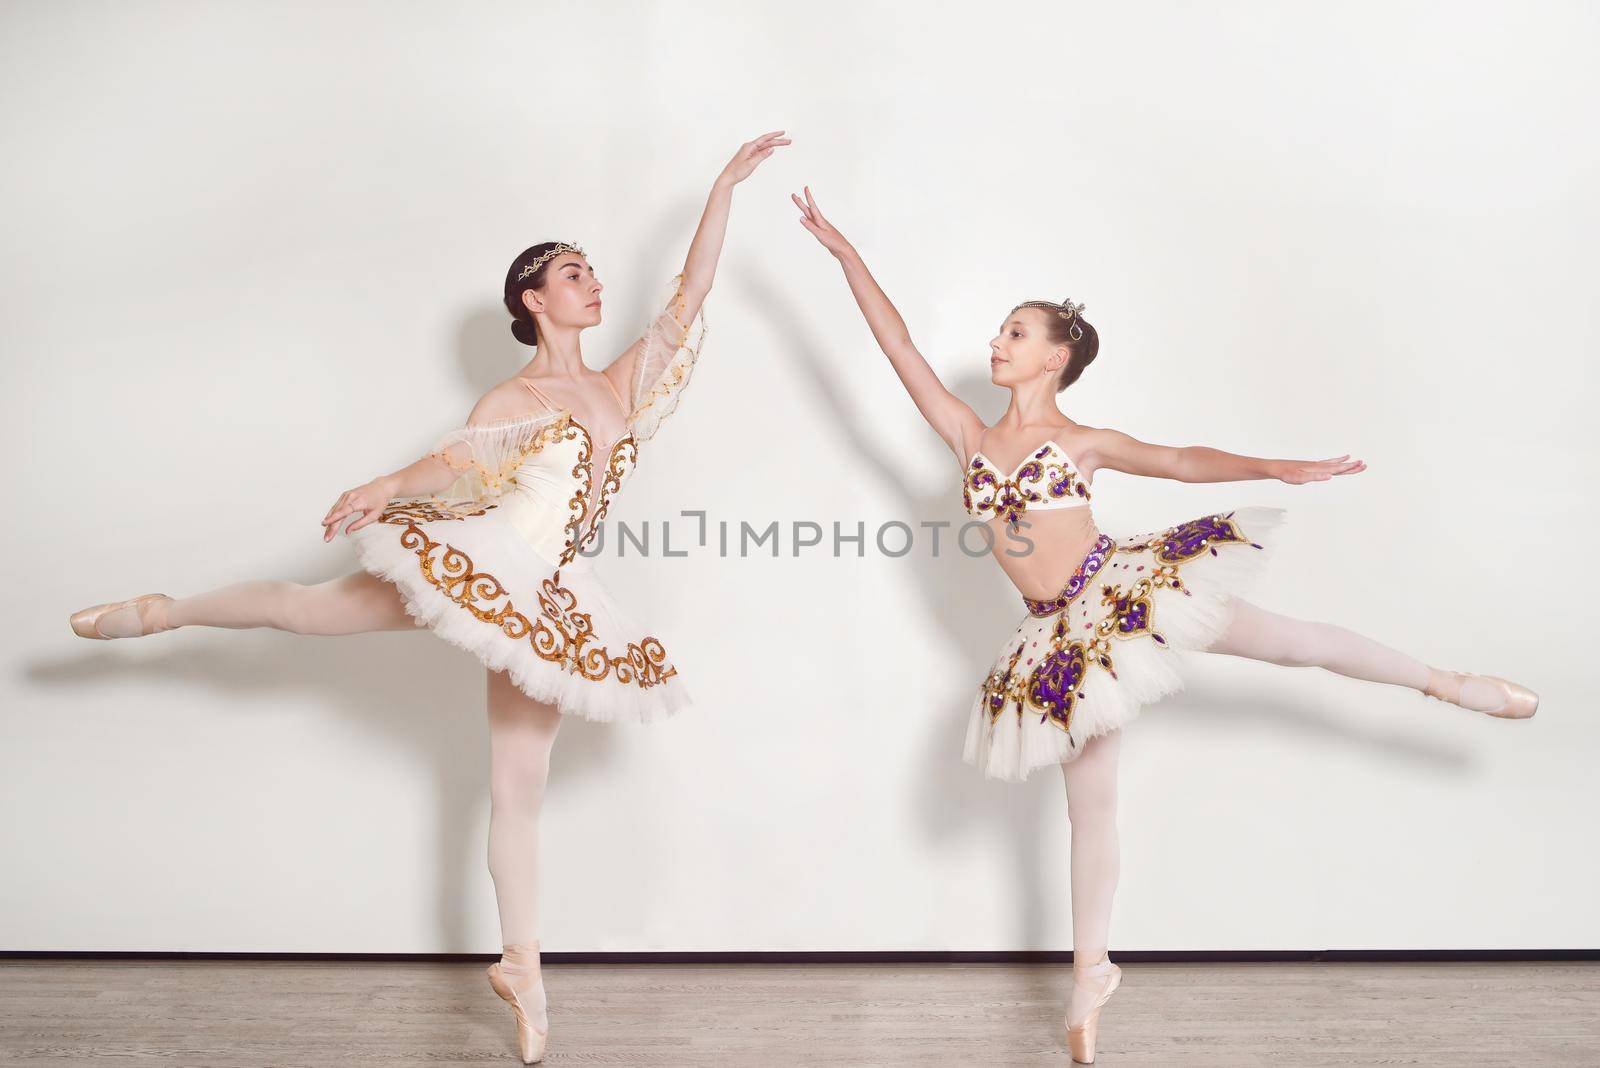 Two ballerinas young practicing ballet poses against a white background